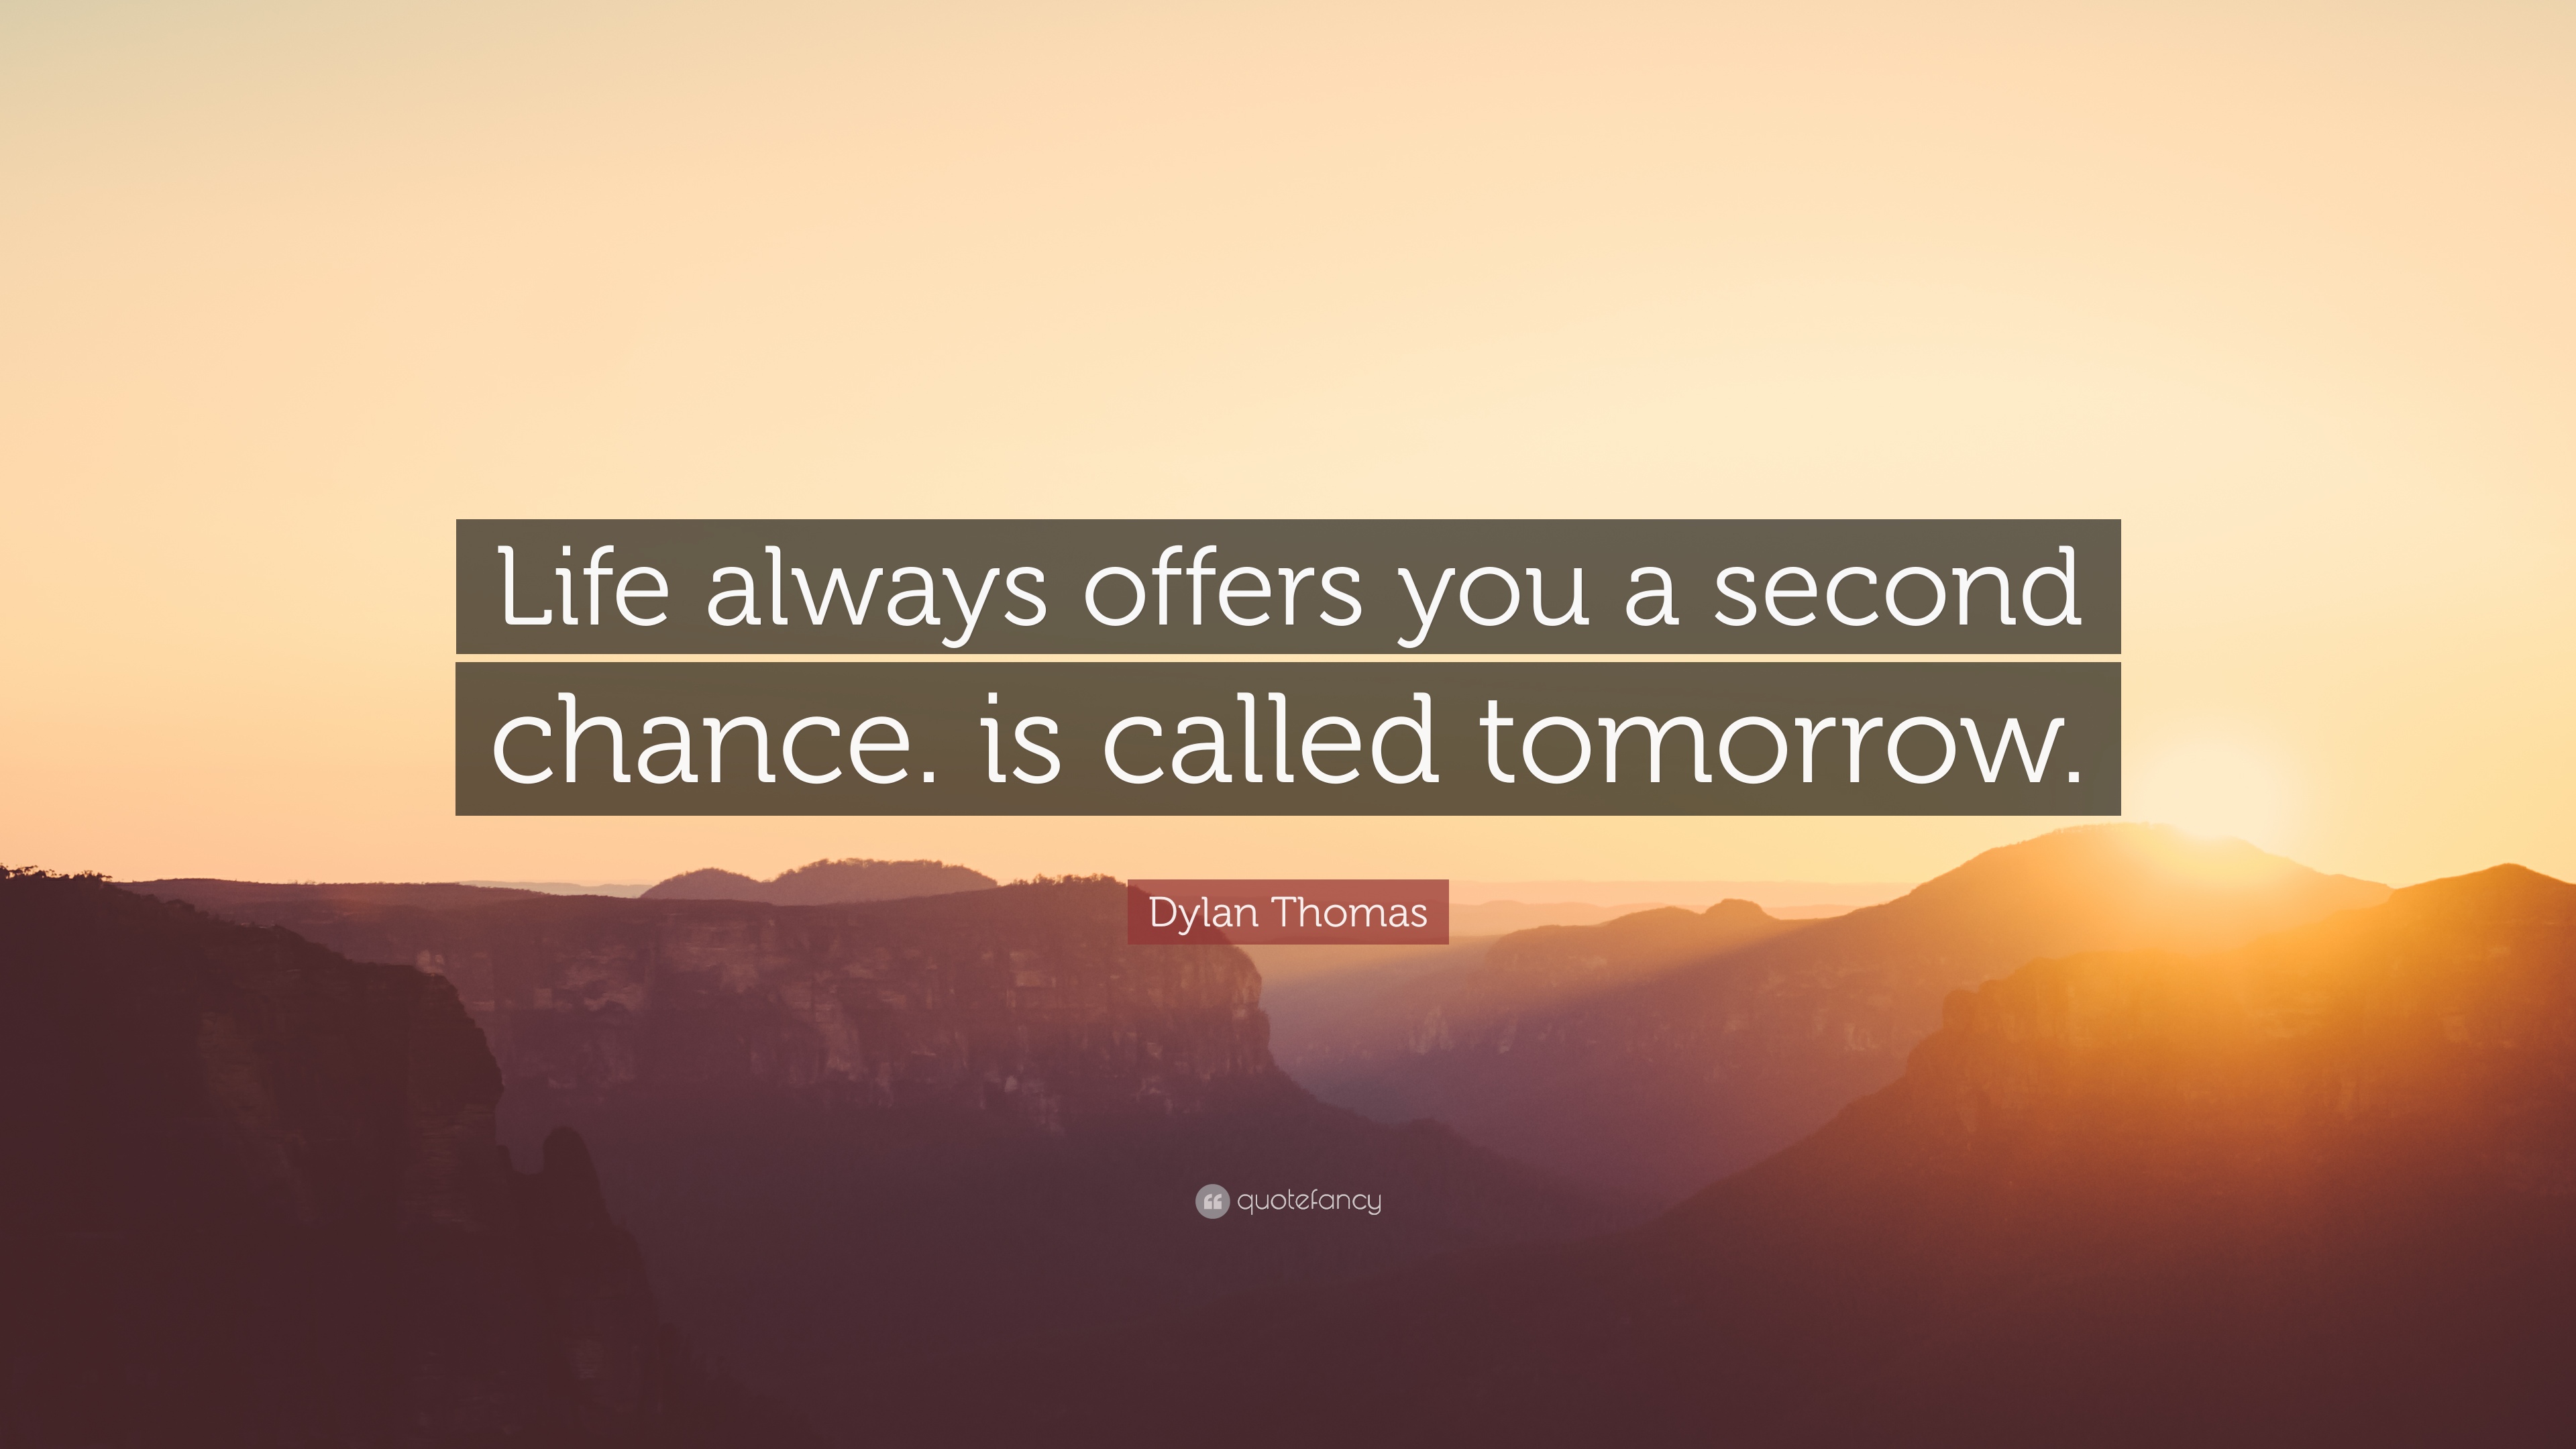 243979-Dylan-Thomas-Quote-Life-always-offers-you-a-second-chance-is.jpg